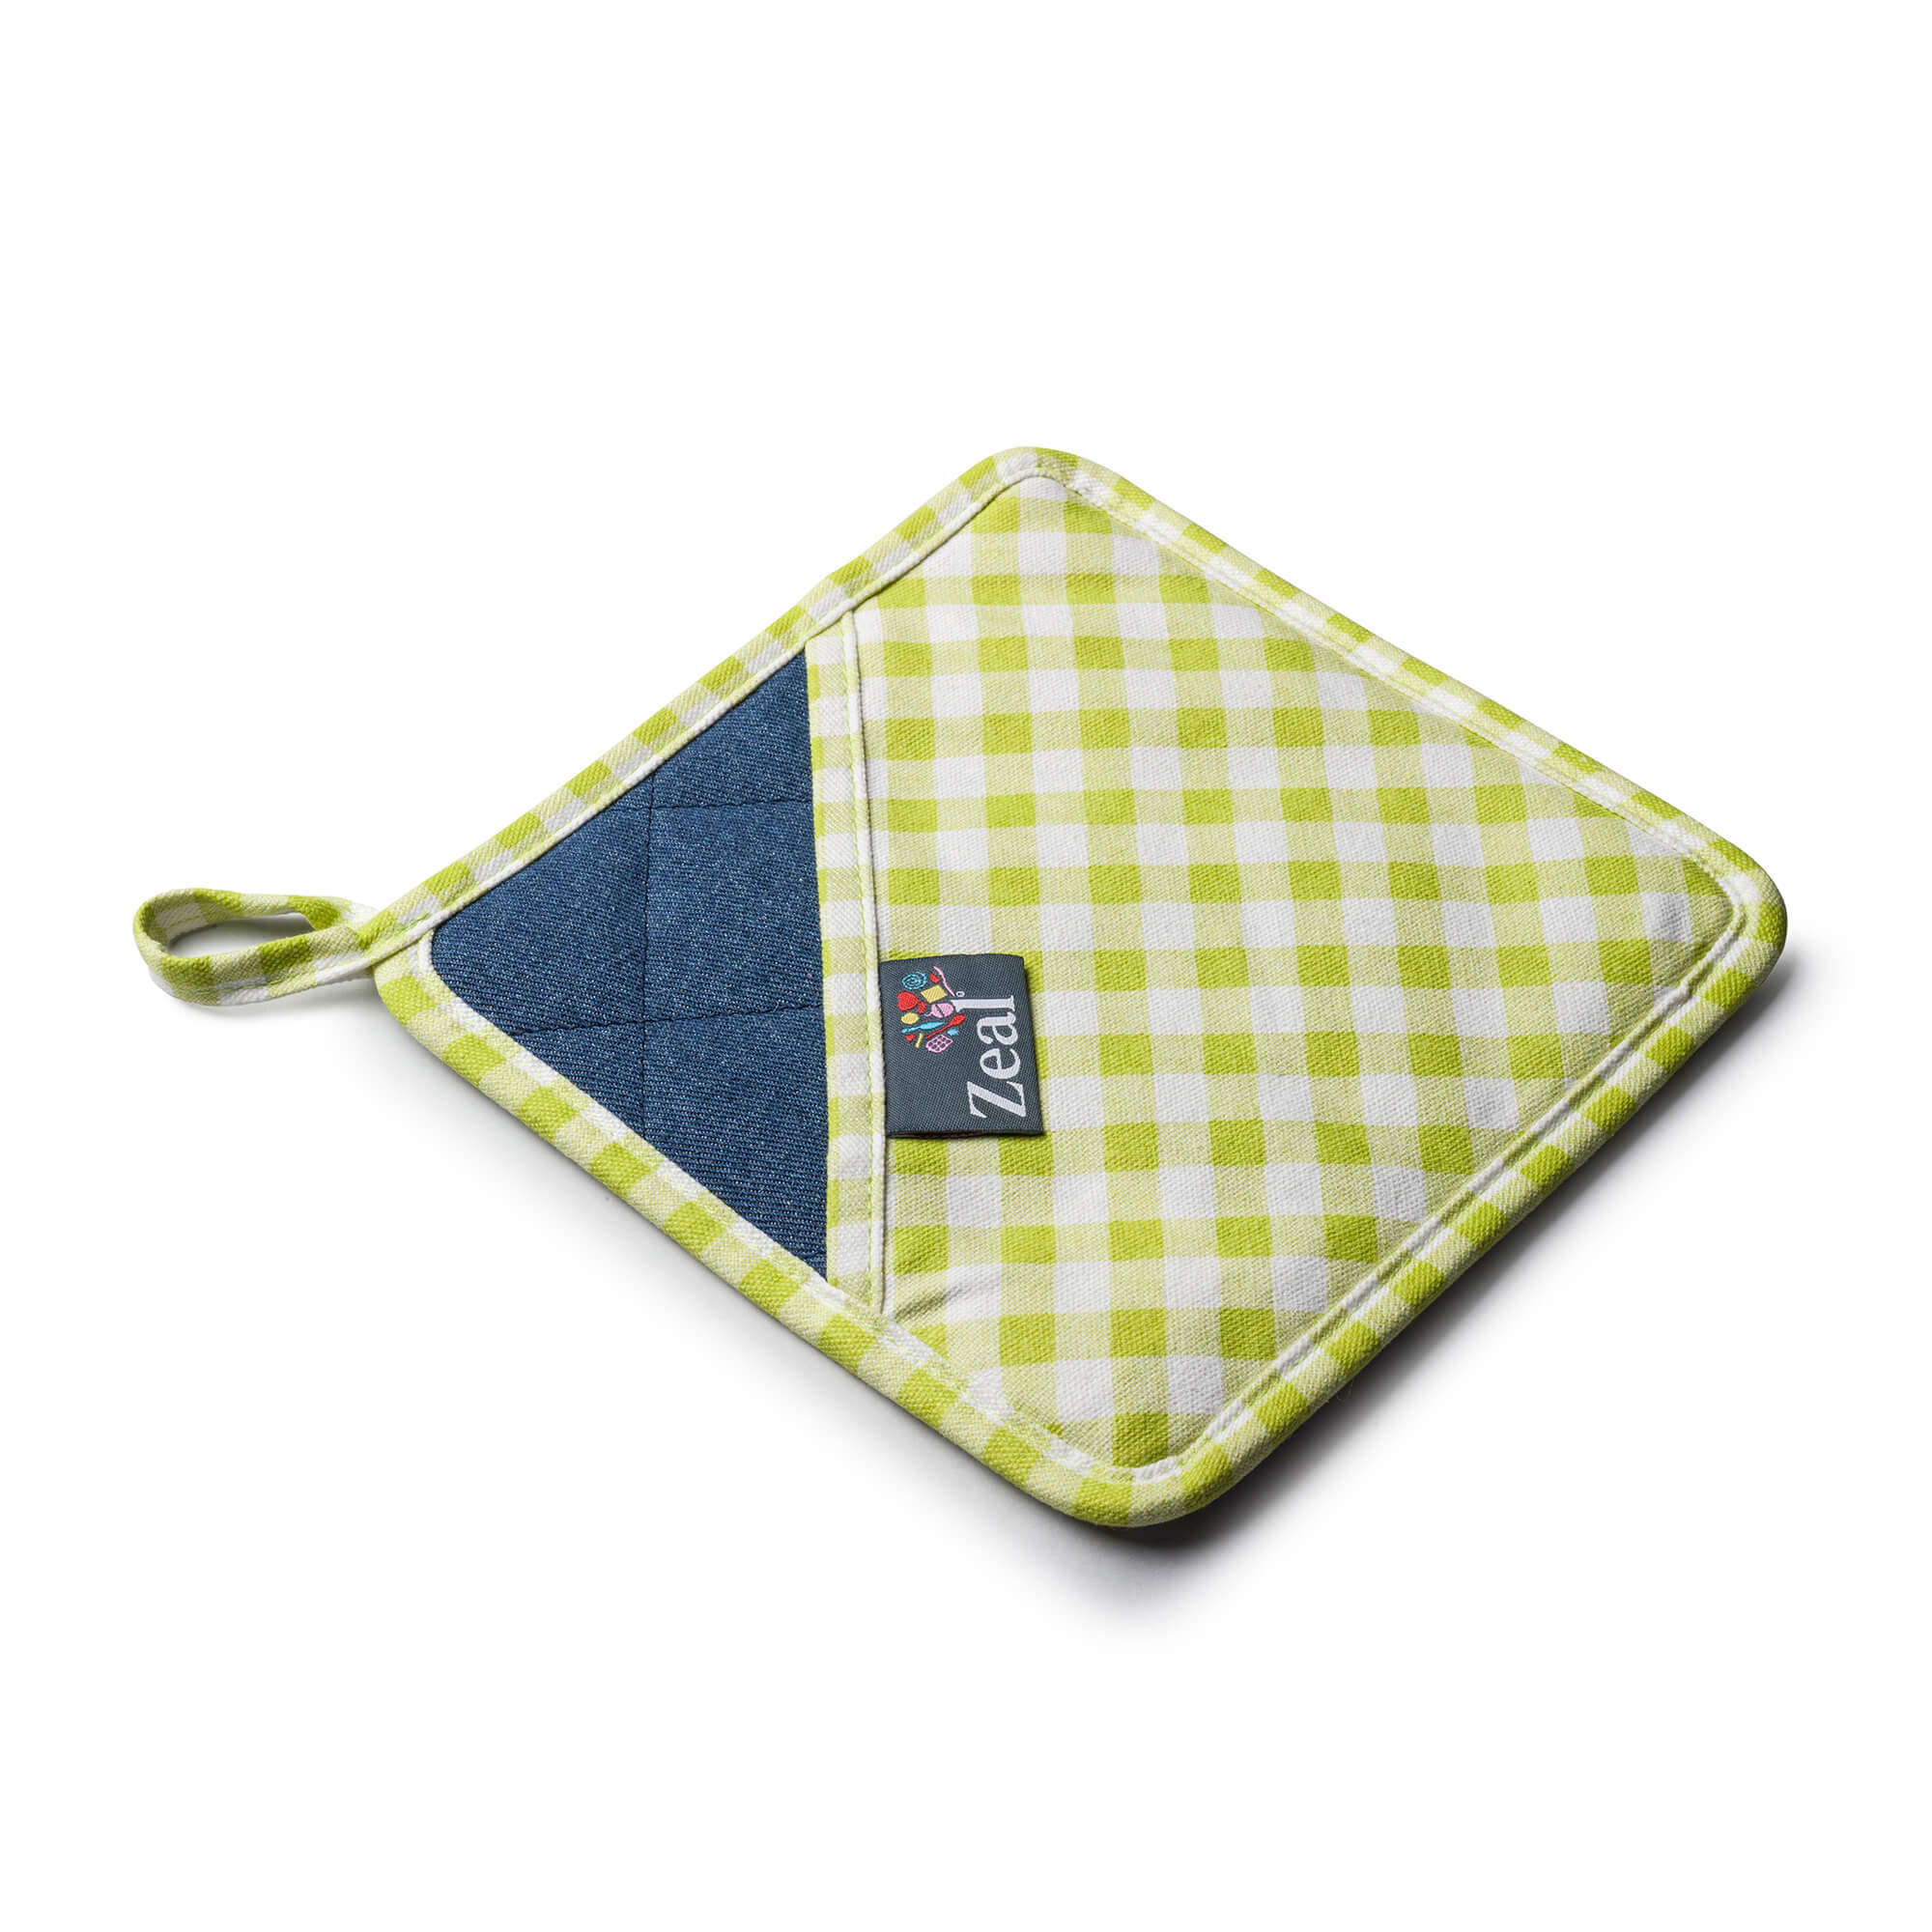 Lime Square Shaped Silicone Hot Mat and Grab with gingham fabric 